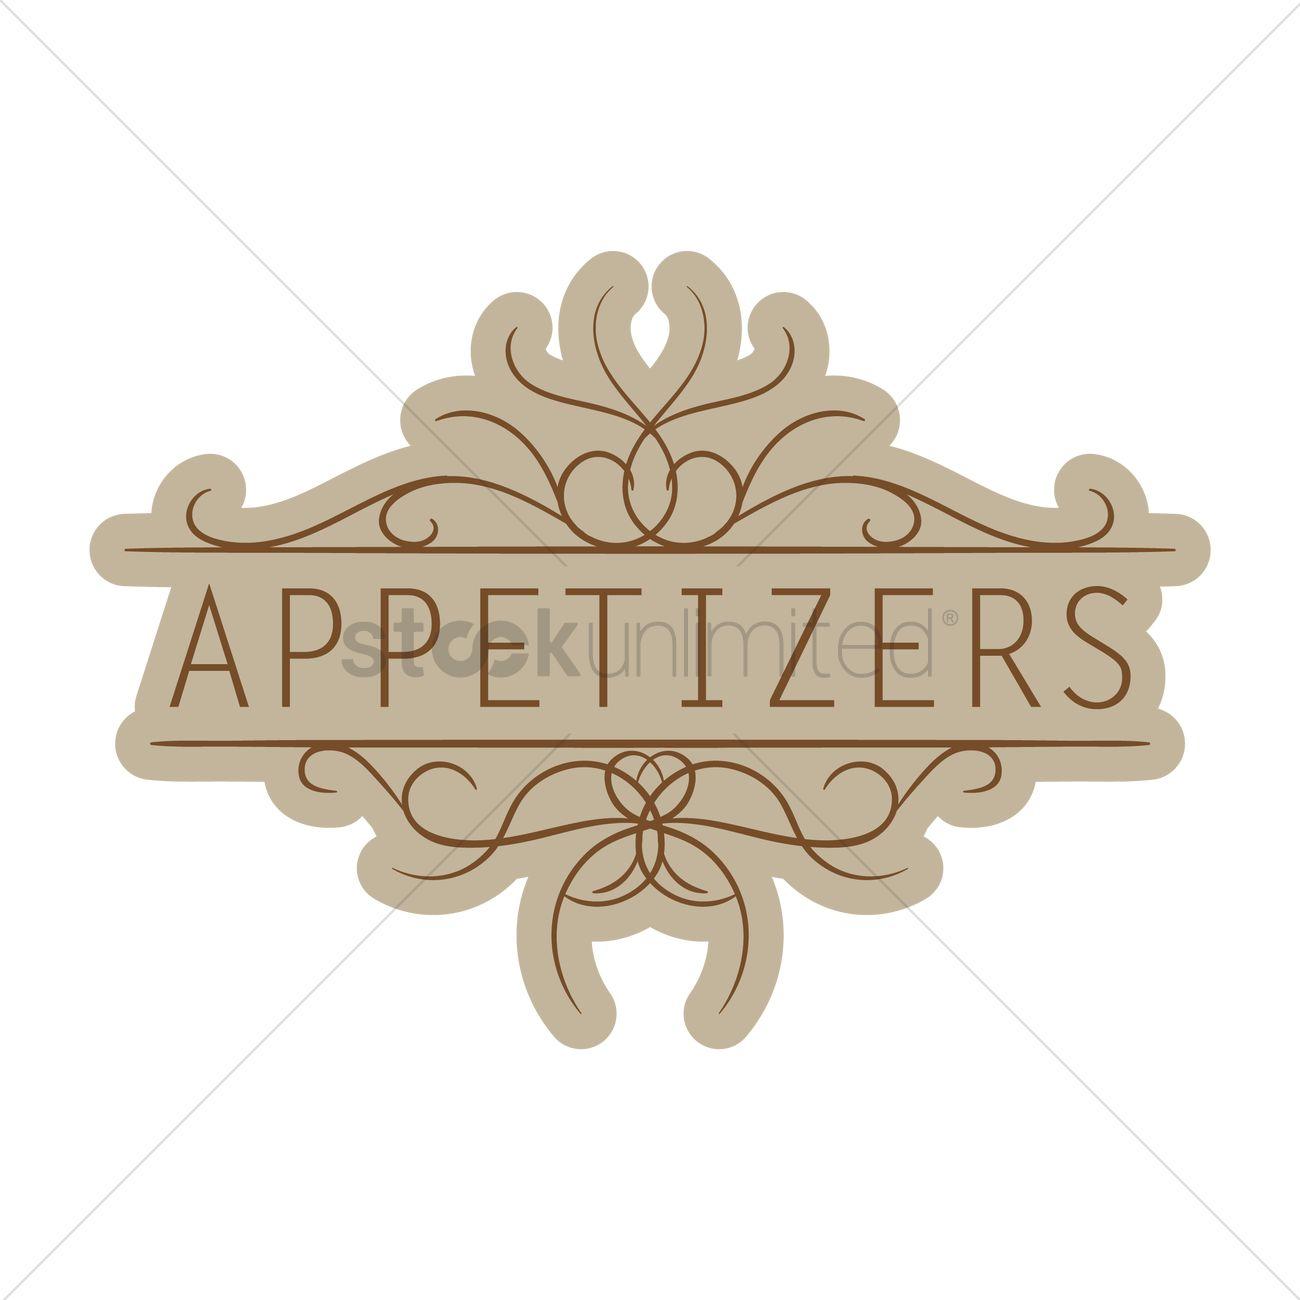 Appetizers Logo - Appetizers menu title Vector Image - 1859557 | StockUnlimited